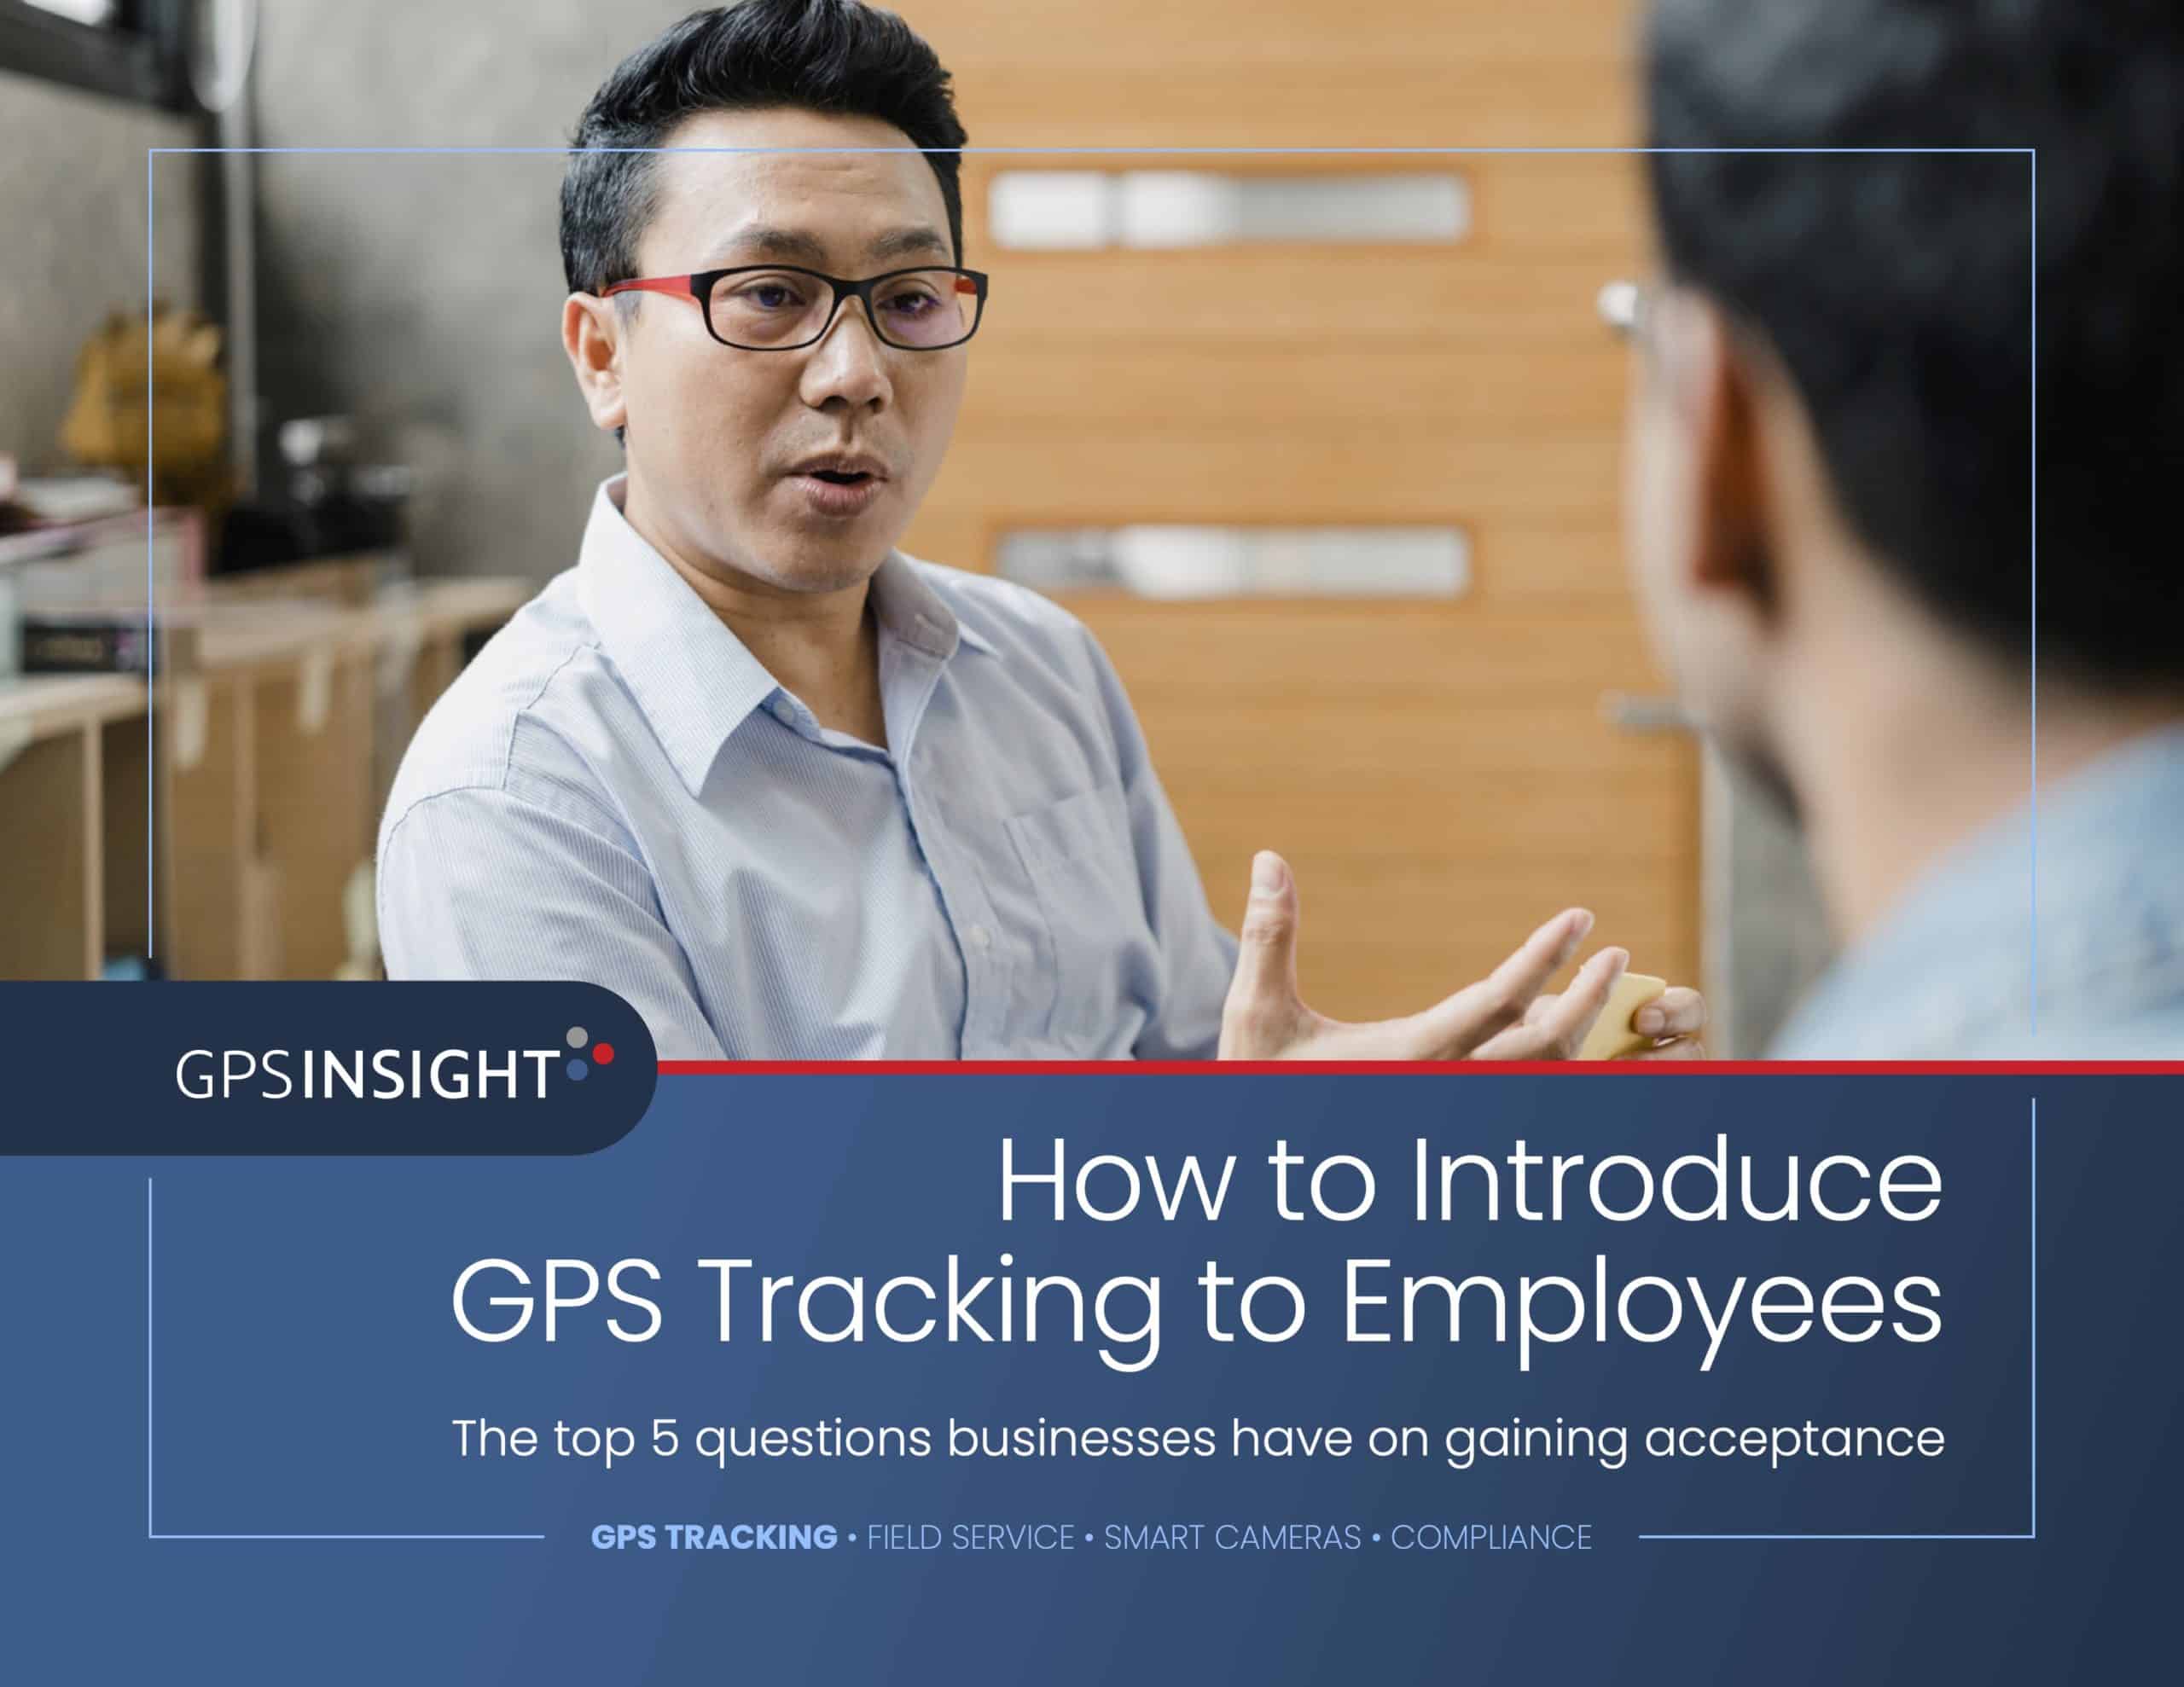 GPSI Ebook How to Introduce GPS Tracking 2022 scaled